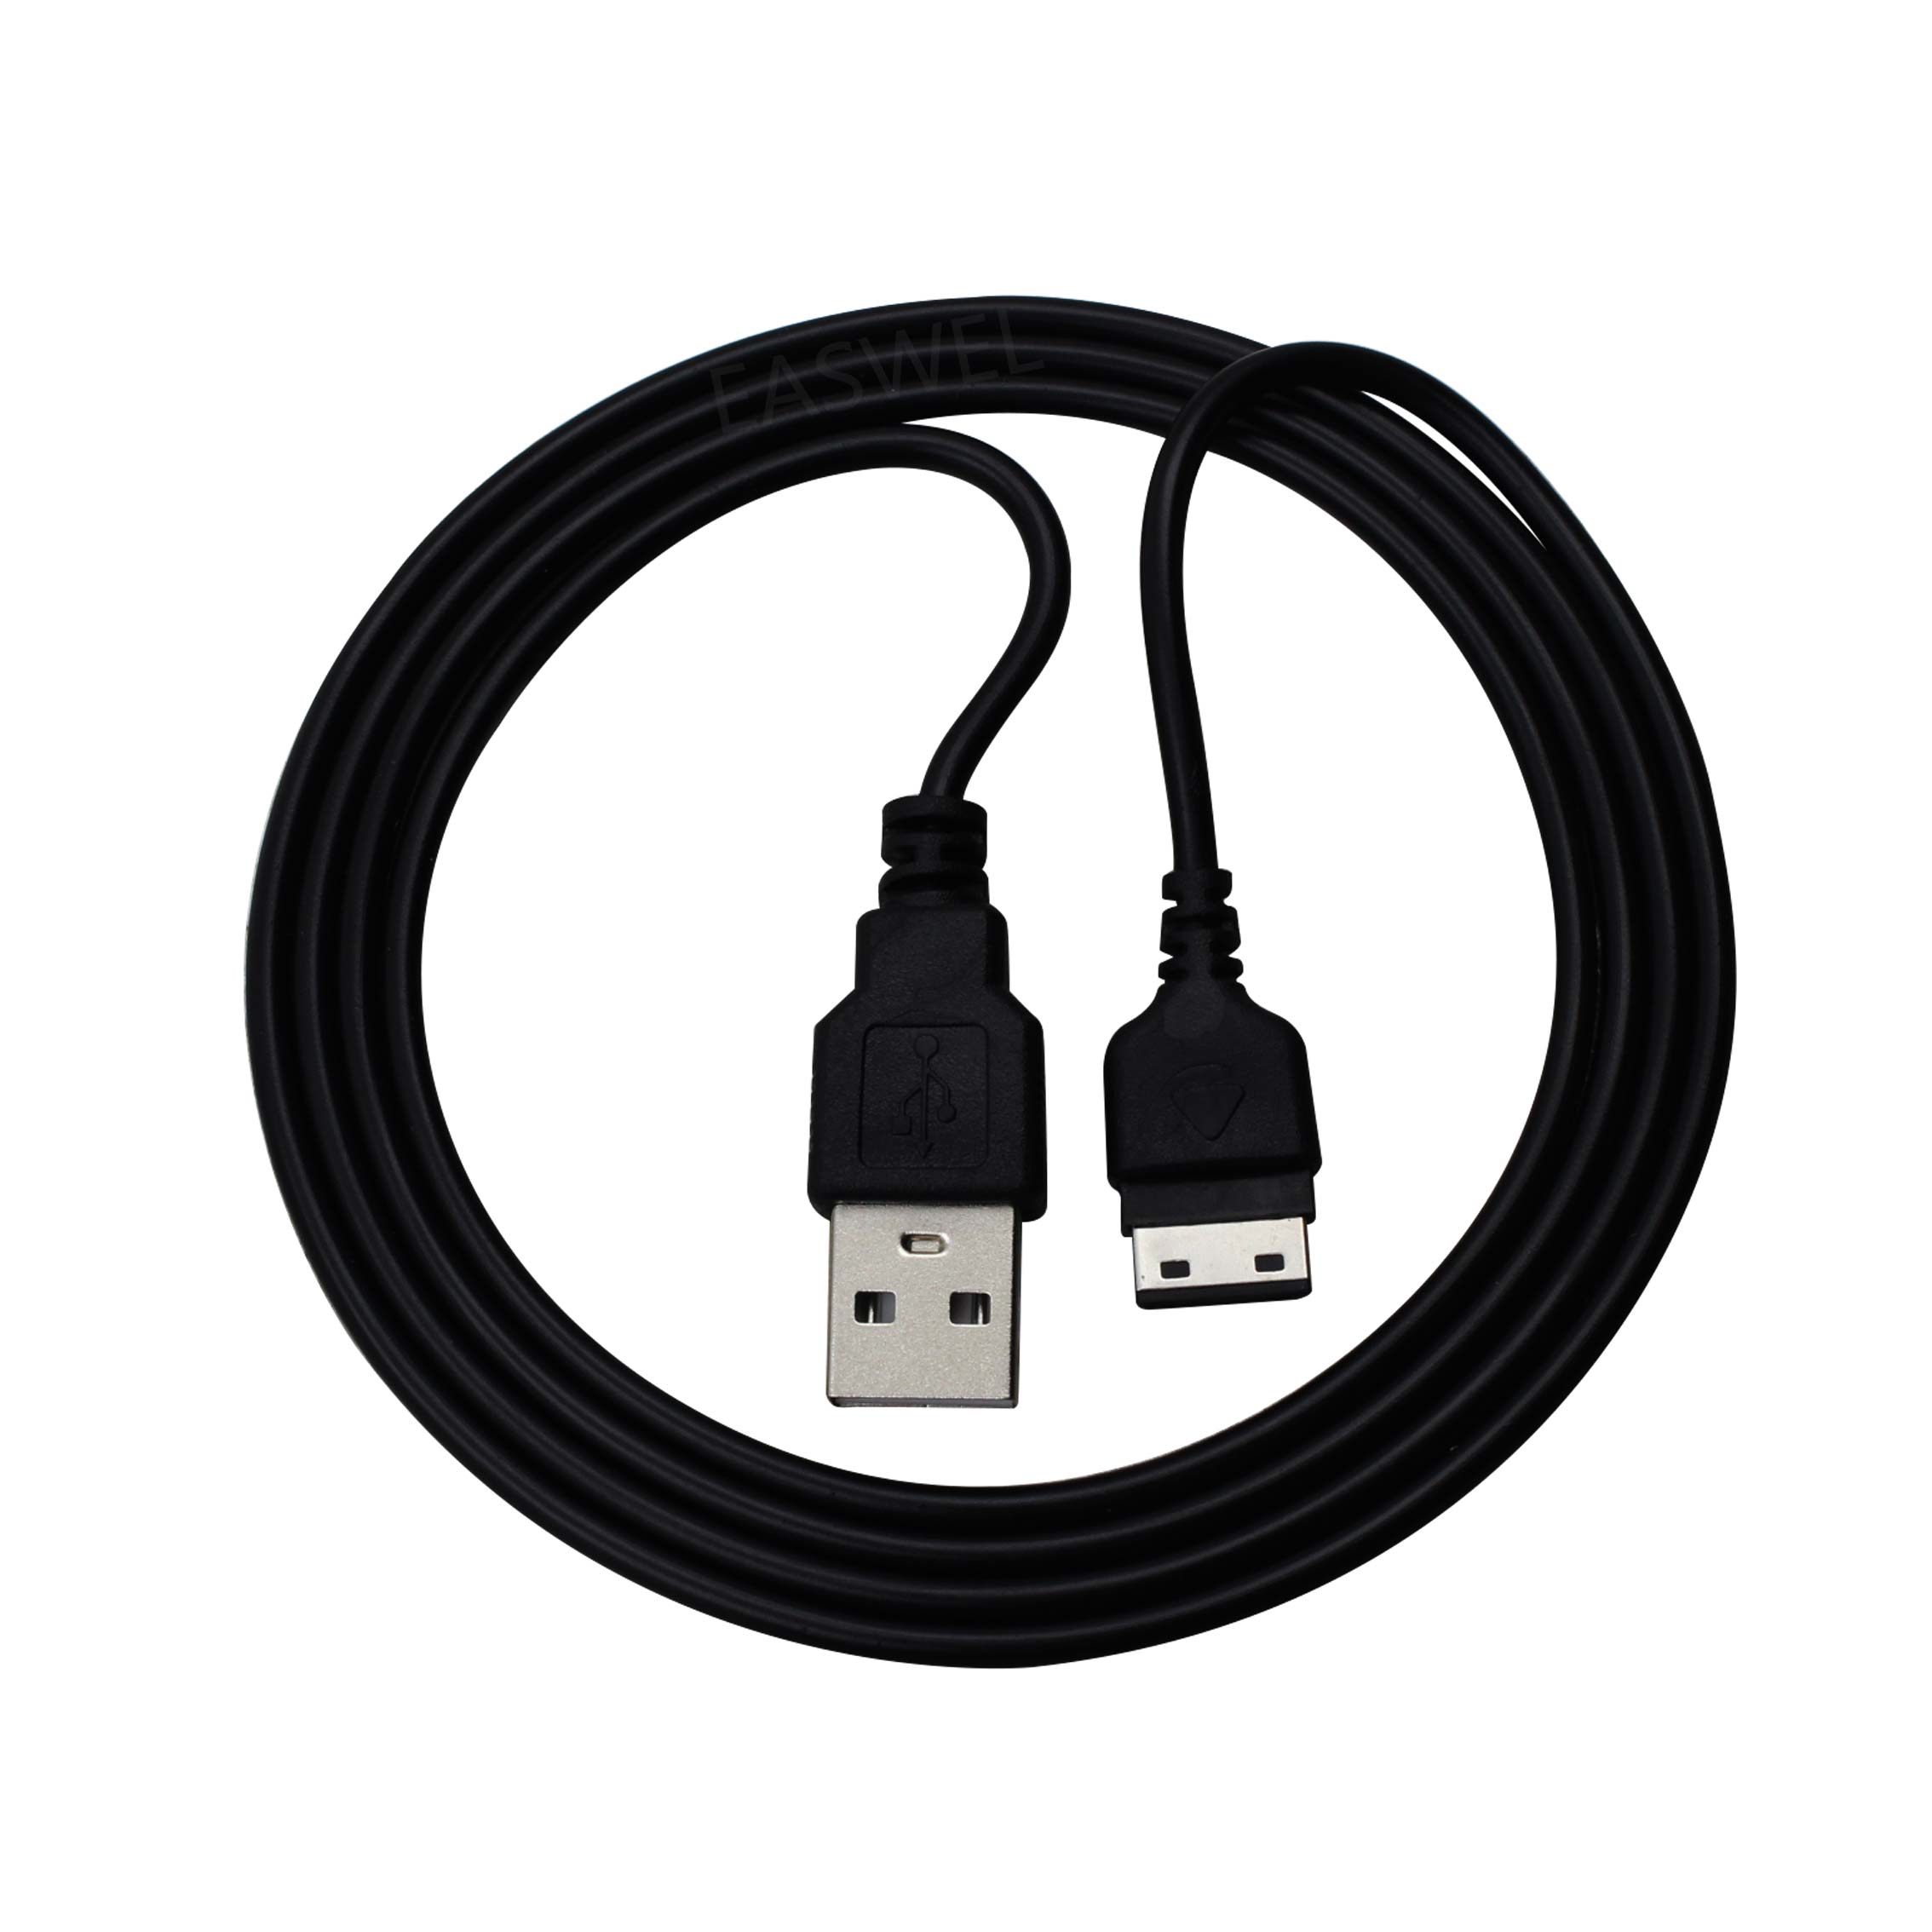 USB Charger Data Cable Koord voor Samsung gt-i8910 sgh-i900 sgh-i907 sch-i910